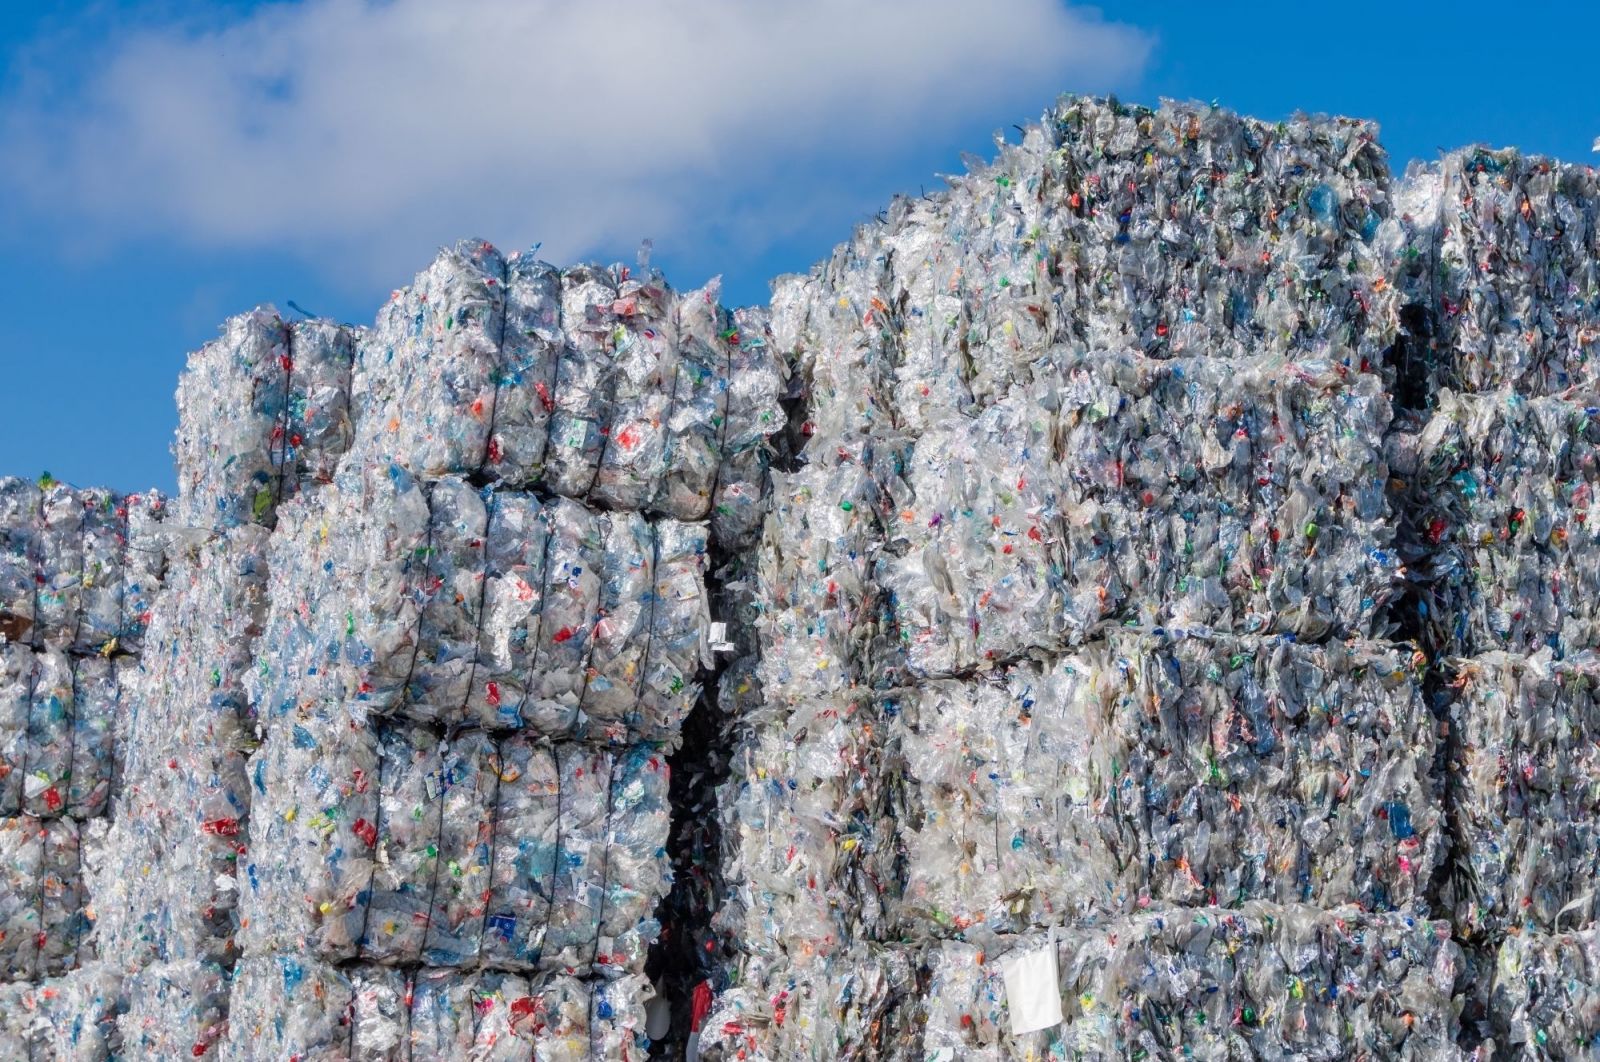 ProZero's facilities convert plastic and organic waste into usable raw materials and commodities. (Photo/File)